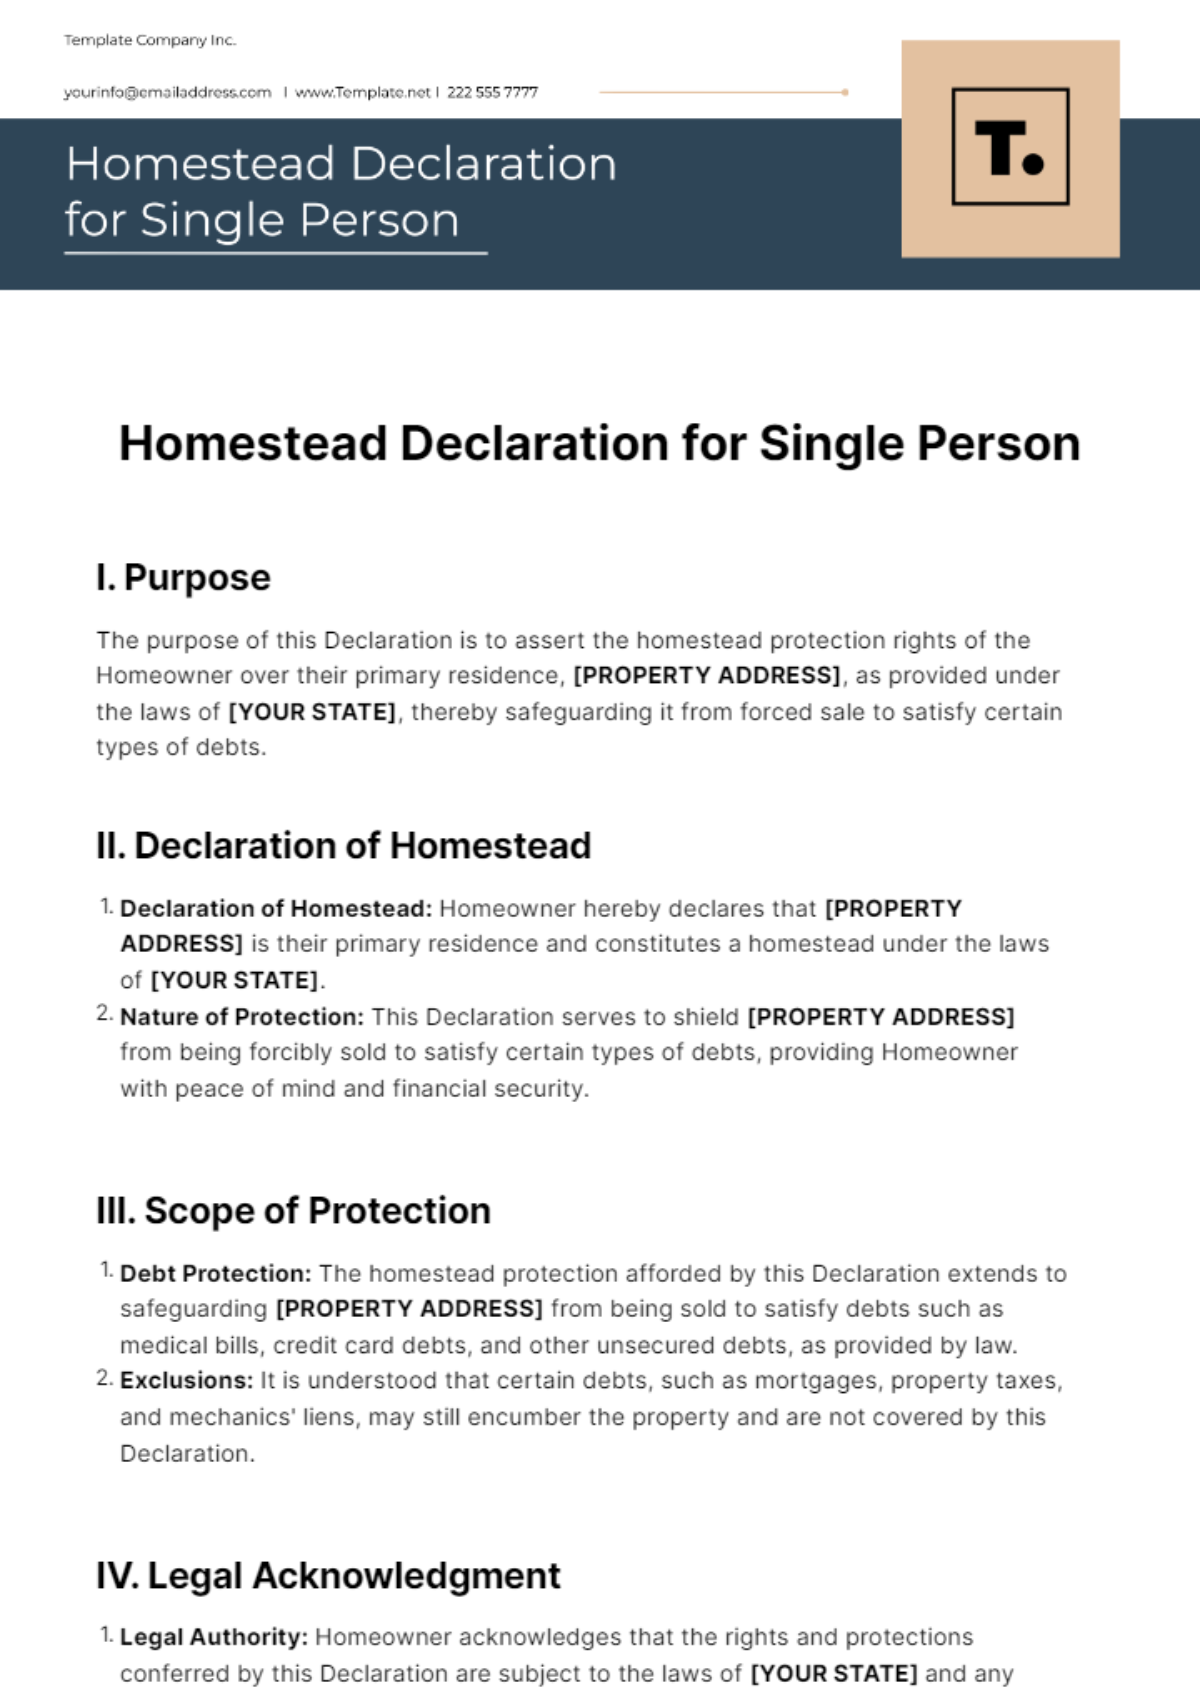 Homestead Declaration for Single Person Template